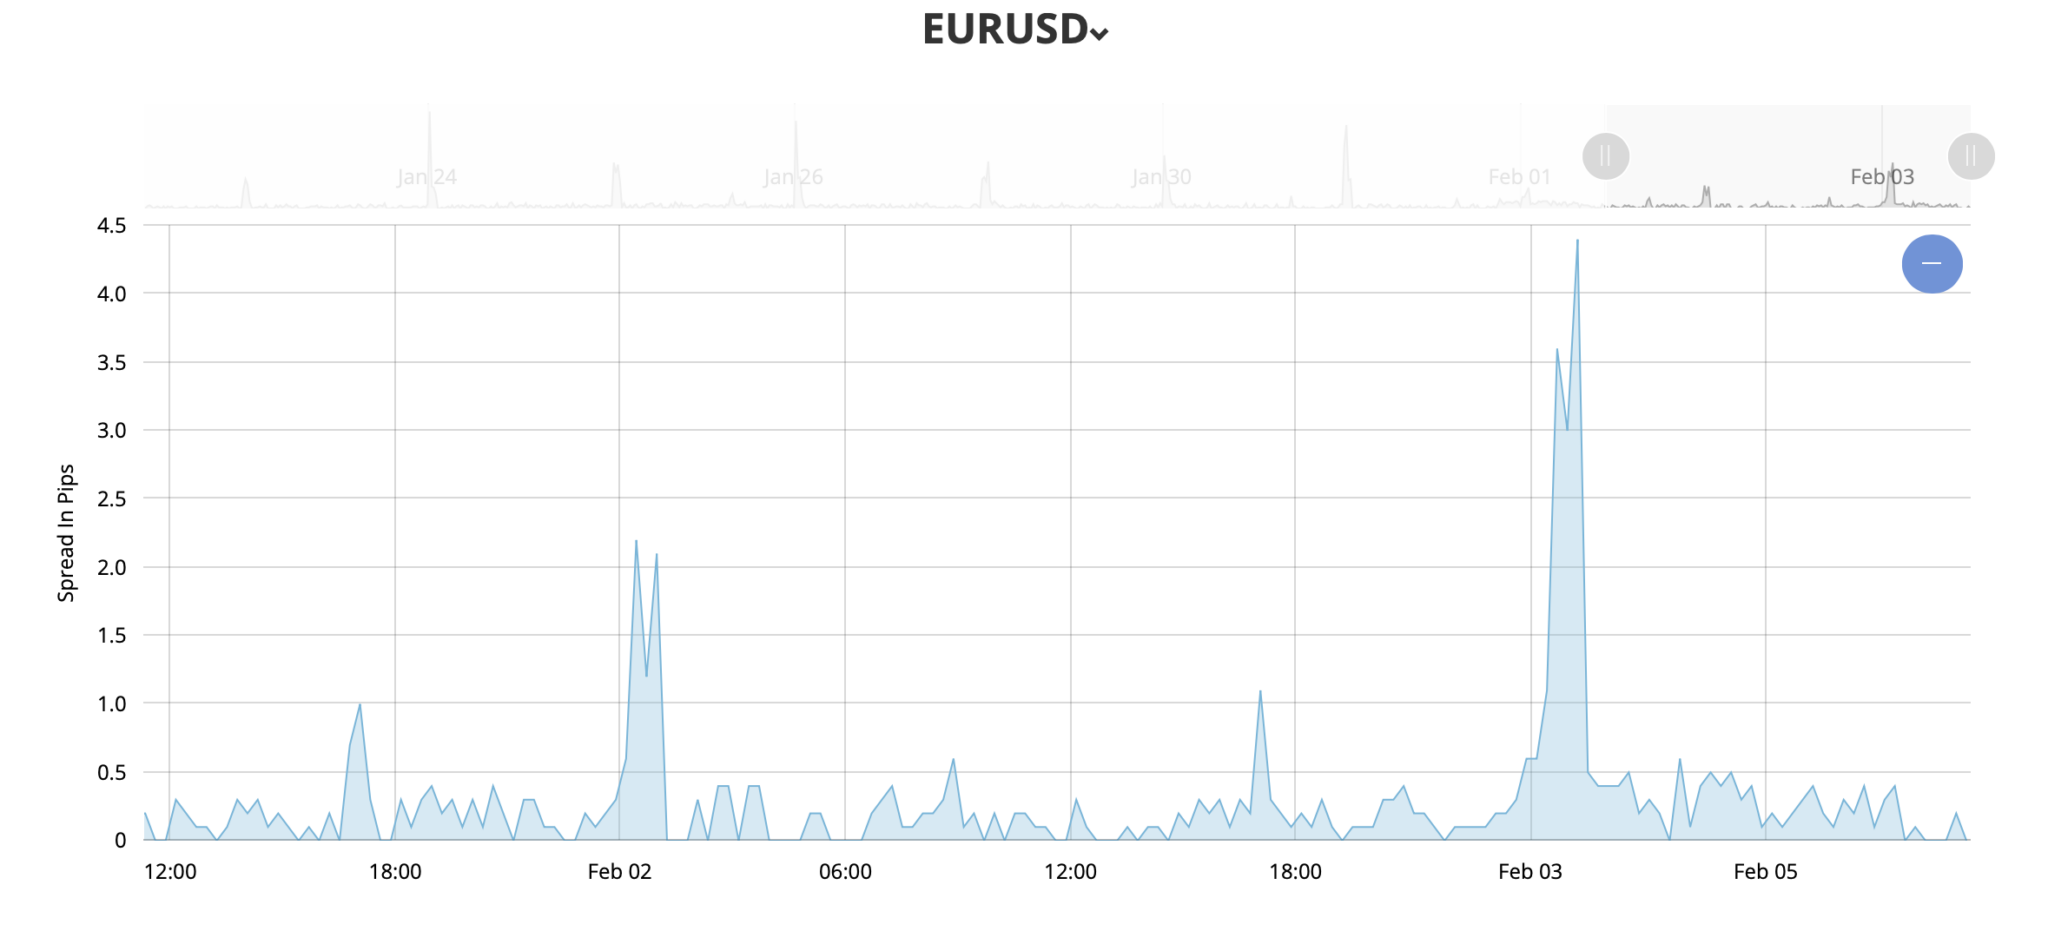 FXCC's average spread chart on EUR/USD